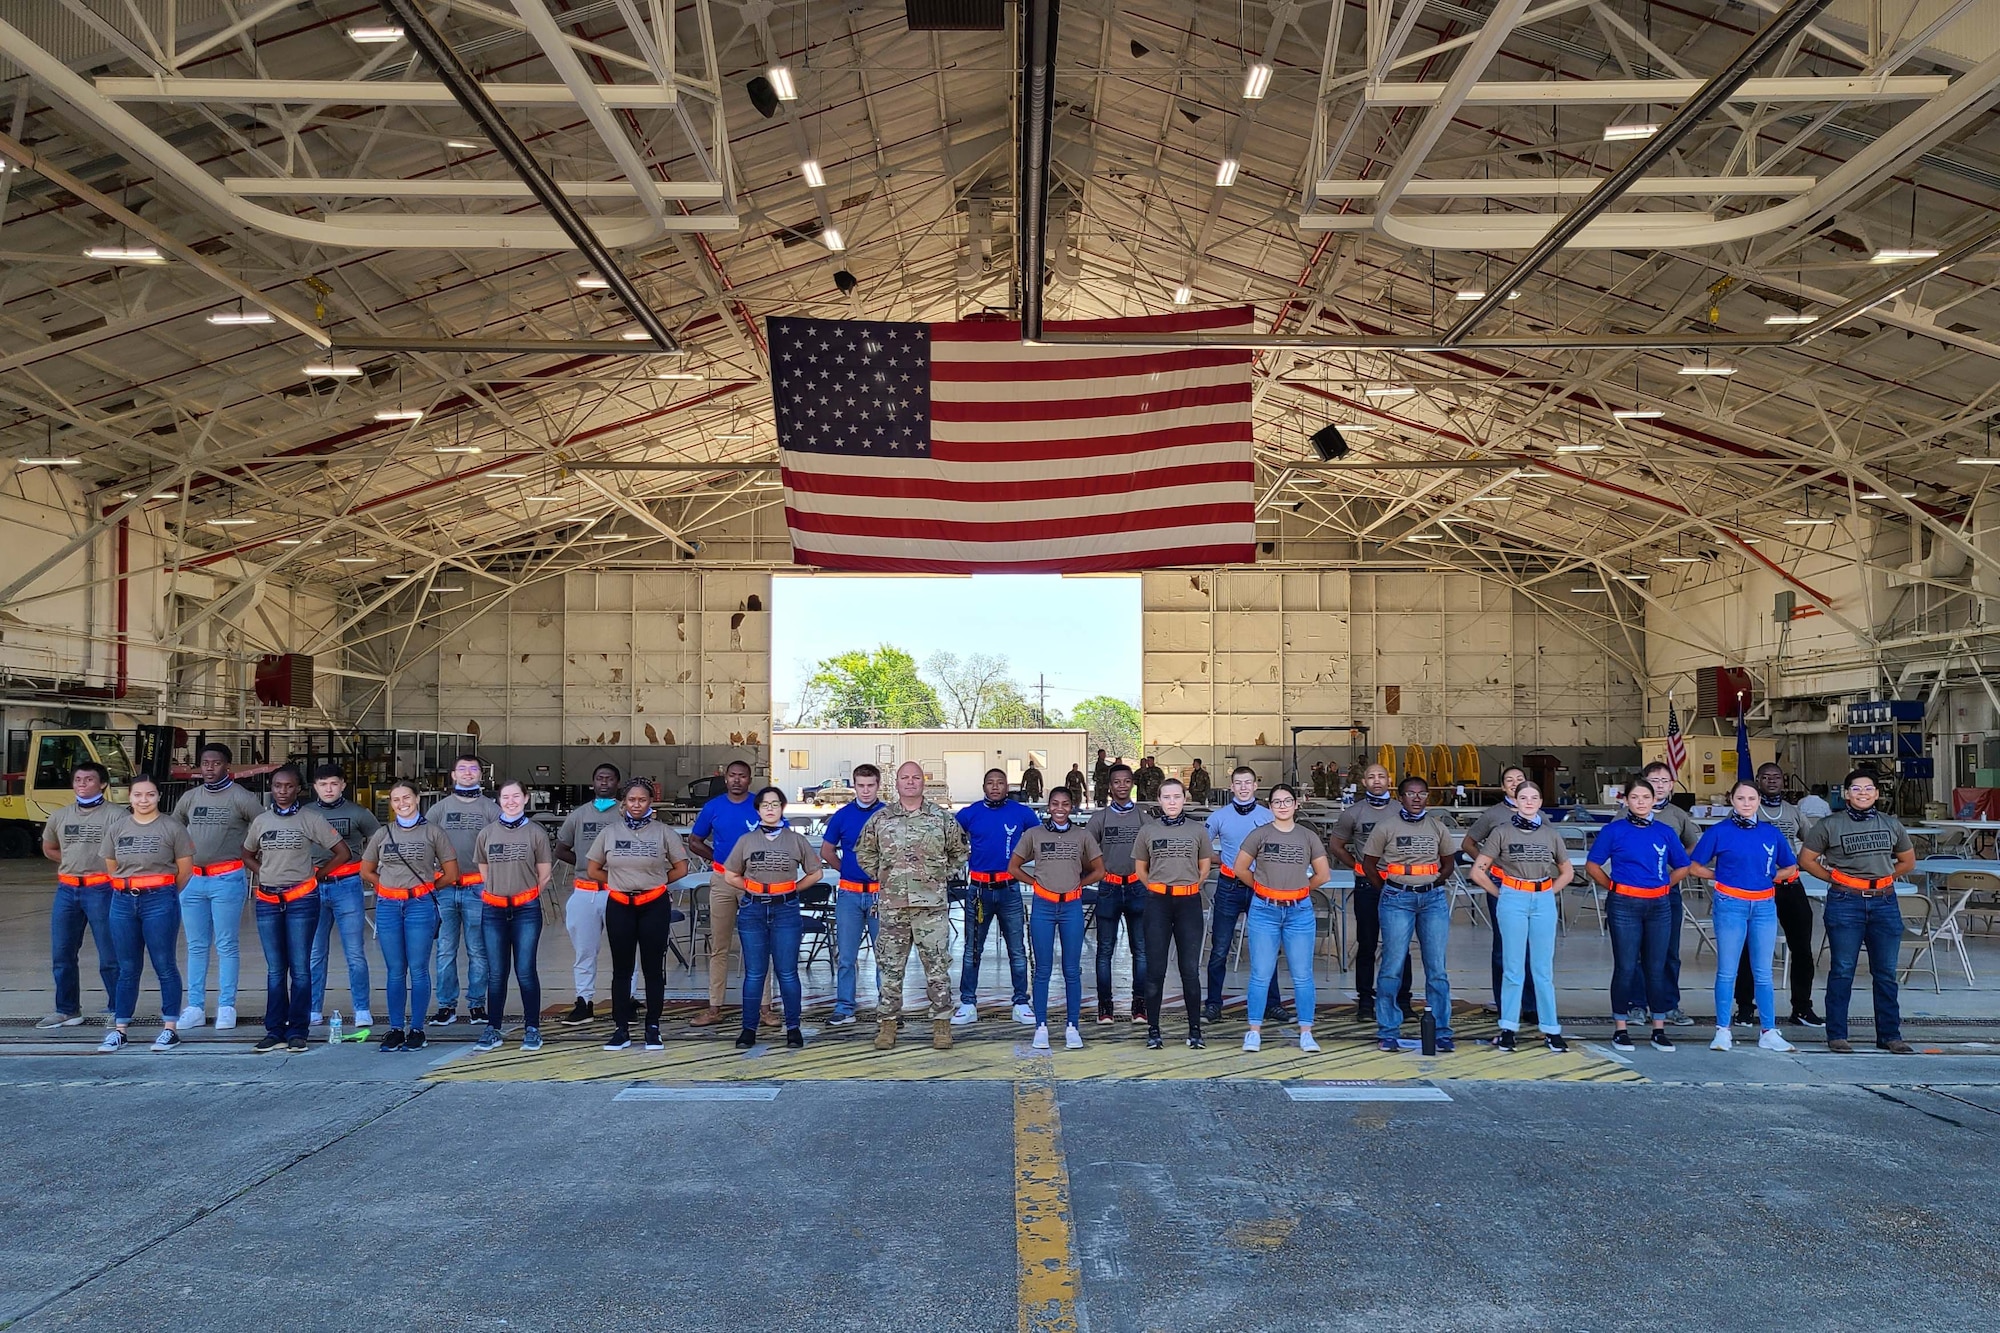 Air Force trainees pose in a group photo with a U.S. Flag overhead.